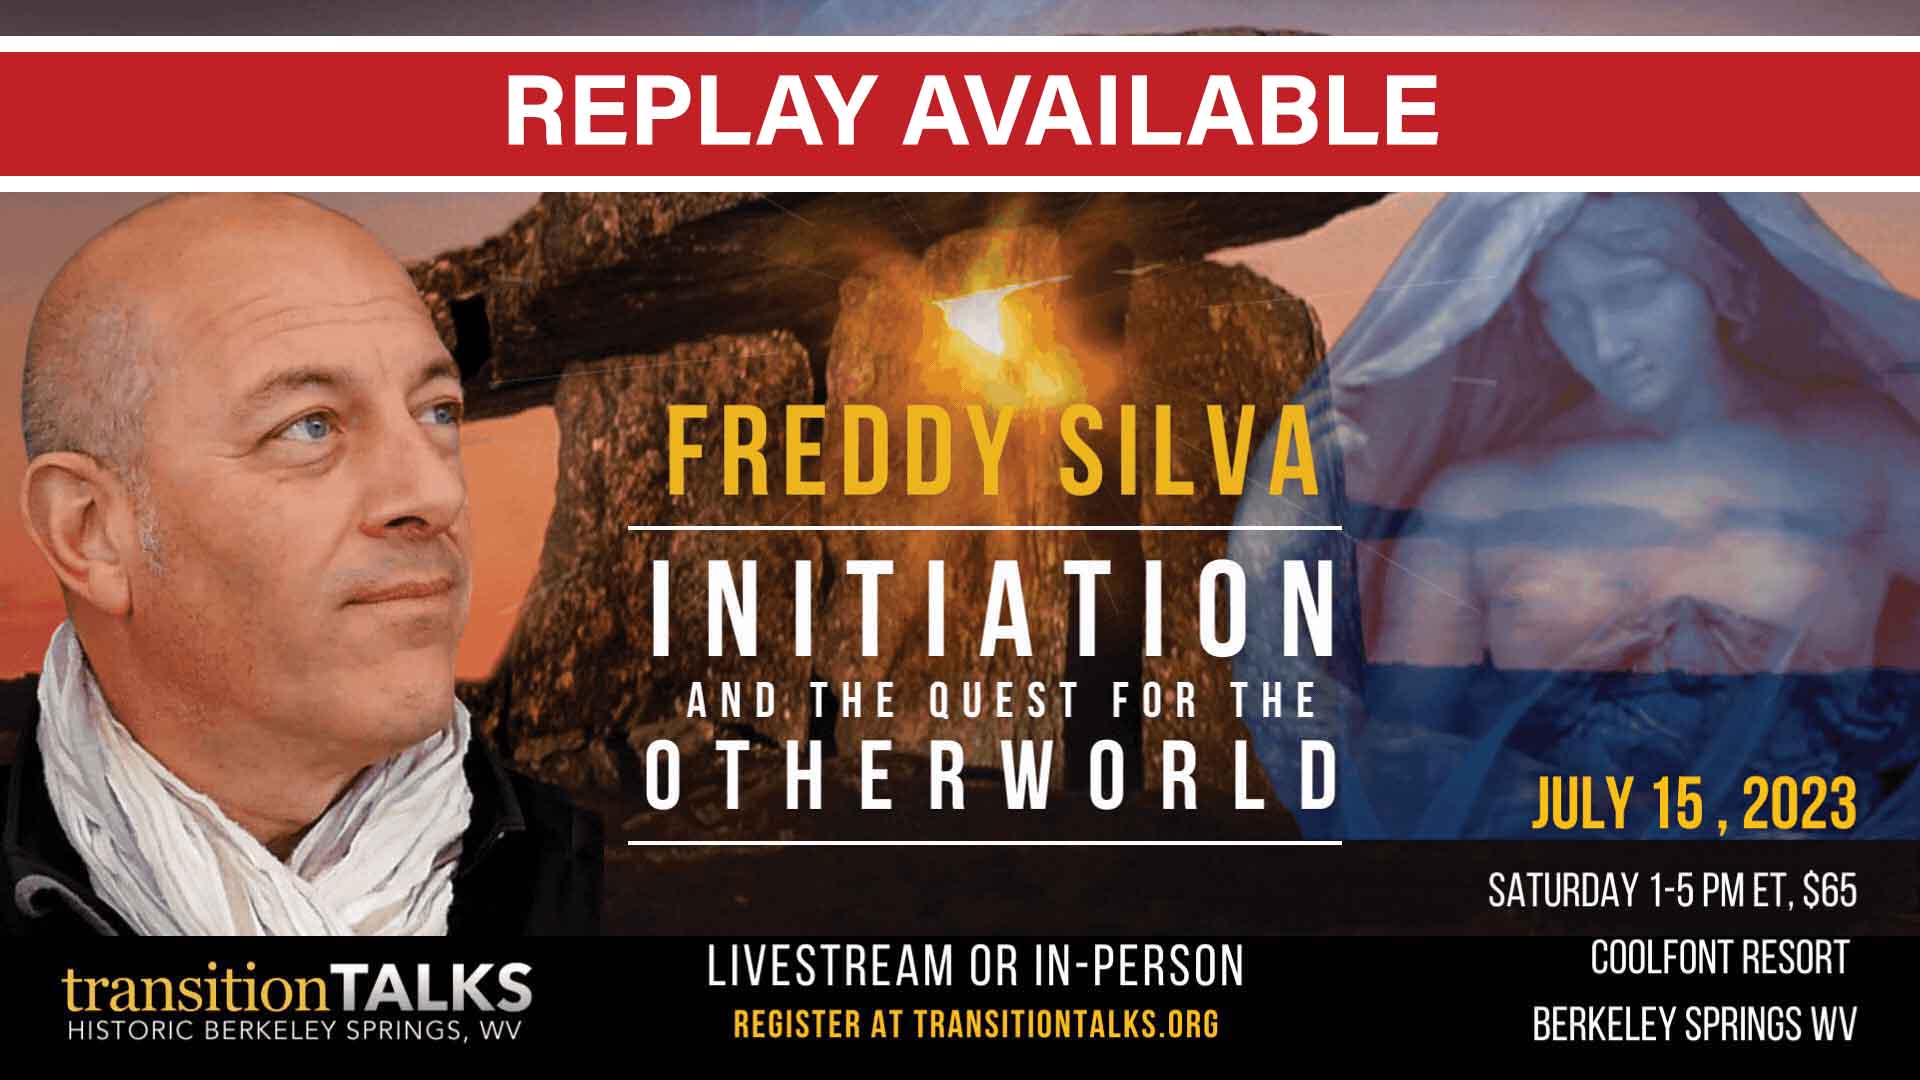 Replay available, Freddy Silva, Initiation and the Quest for the Otherworld